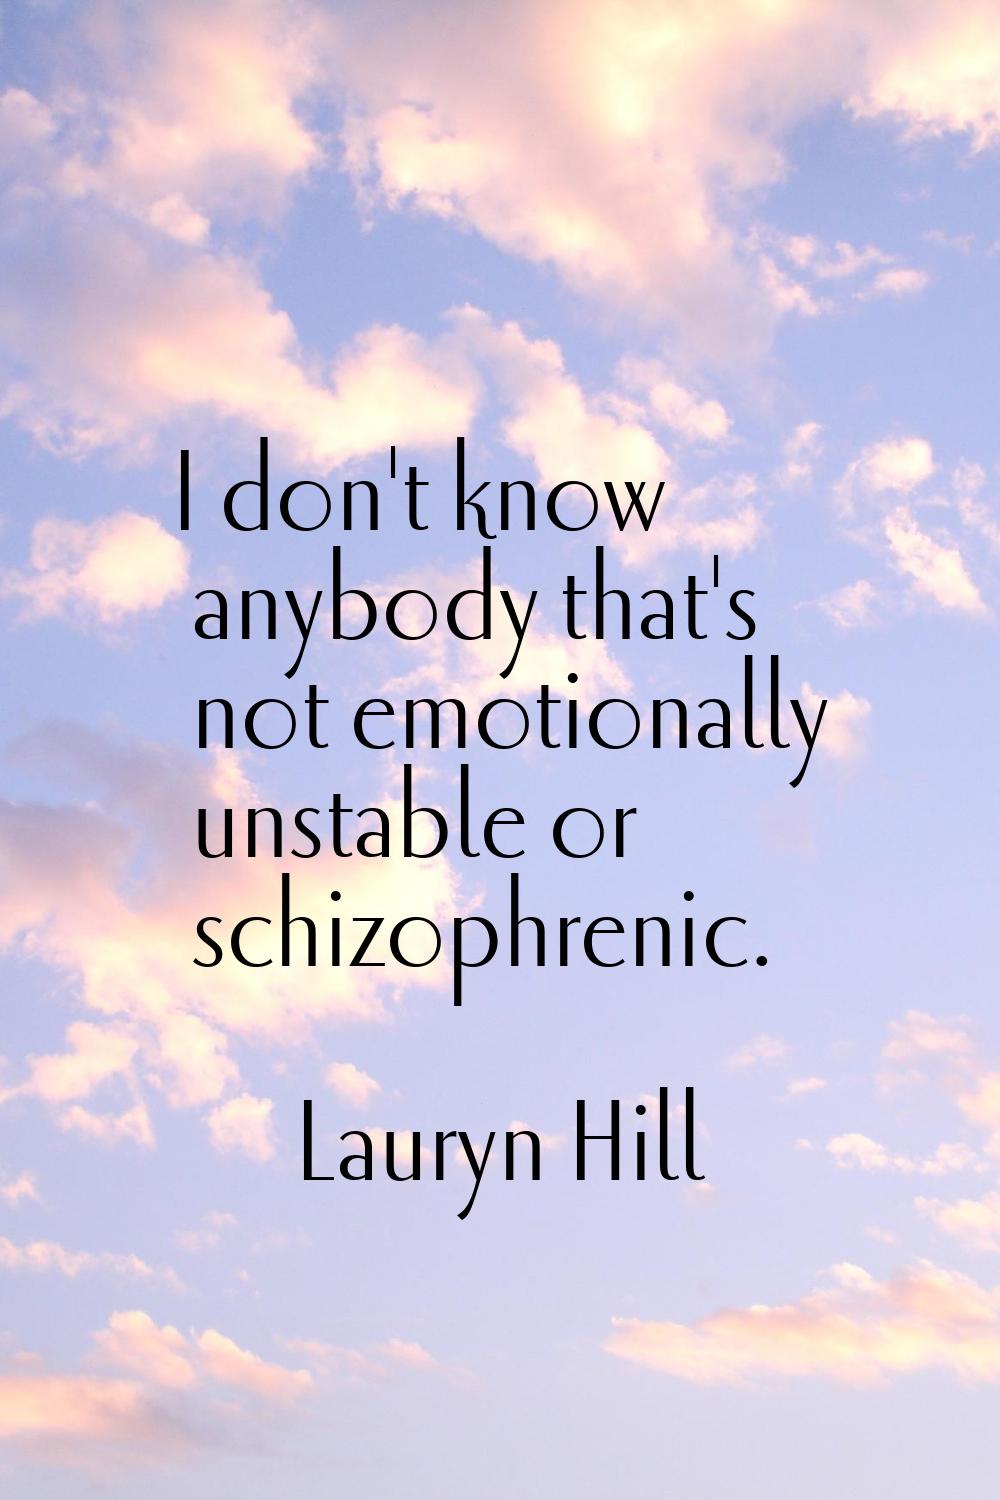 I don't know anybody that's not emotionally unstable or schizophrenic.